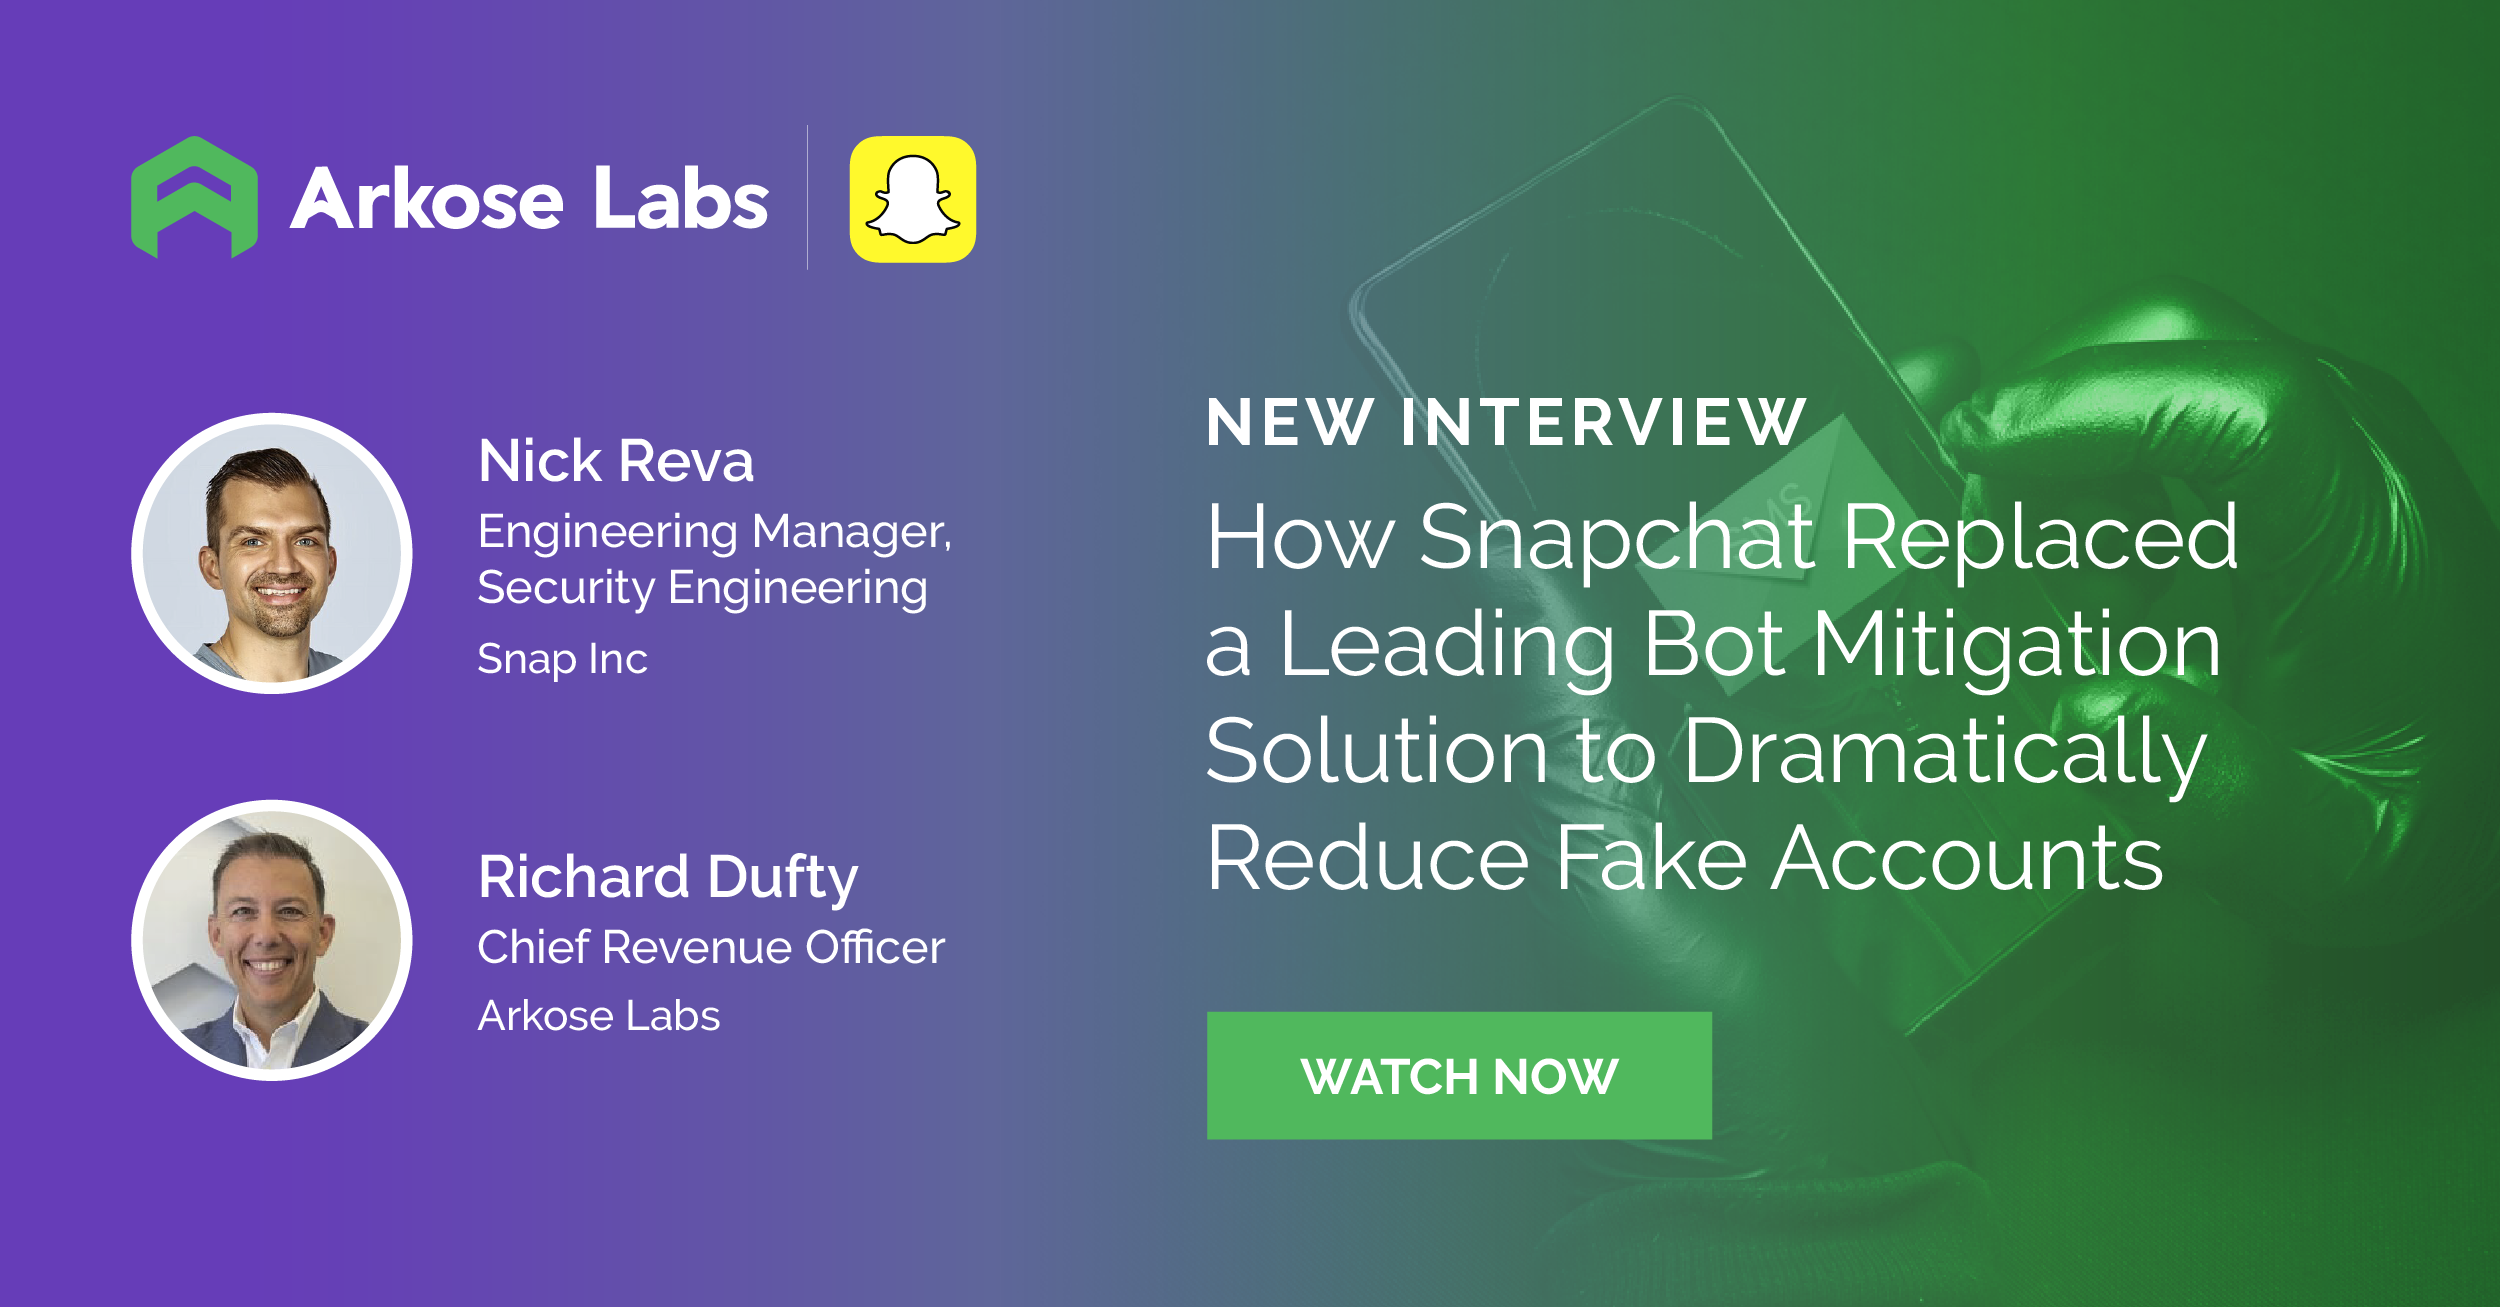 How Snapchat Replaced a Leading Bot Mitigation Solution to Dramatically Reduce Fake Accounts on the Web